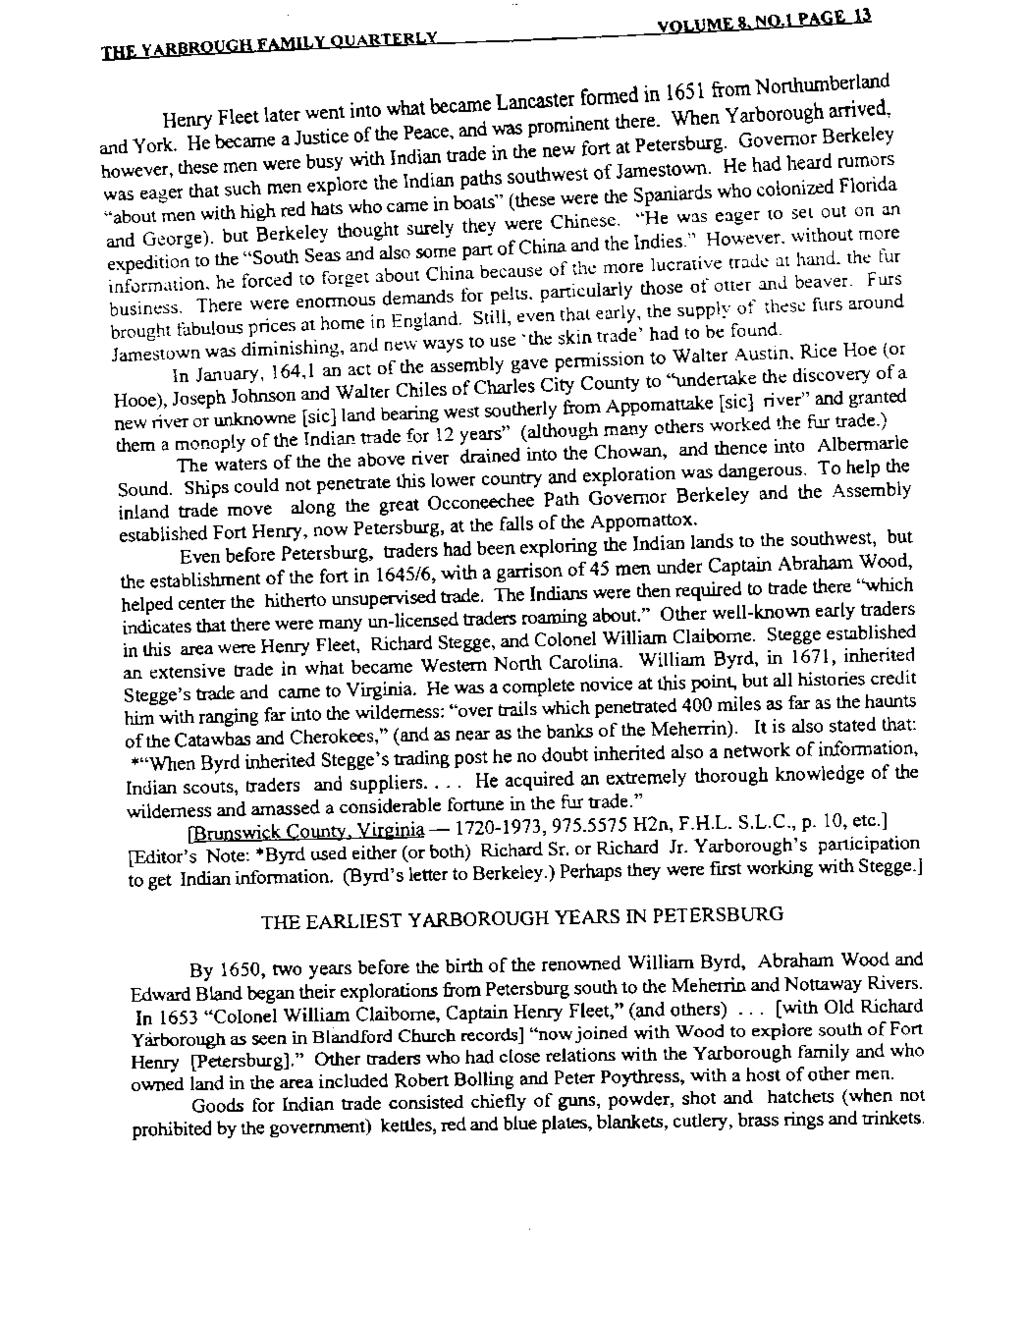 THE YARBROUGH FAMILY QUARTERLY VOWME 8. N0.1 PAGE 13 ~ d n 165 1 from Northumberland Henry Fleet later went into what became Lancaster.1orme 1. andy ork.